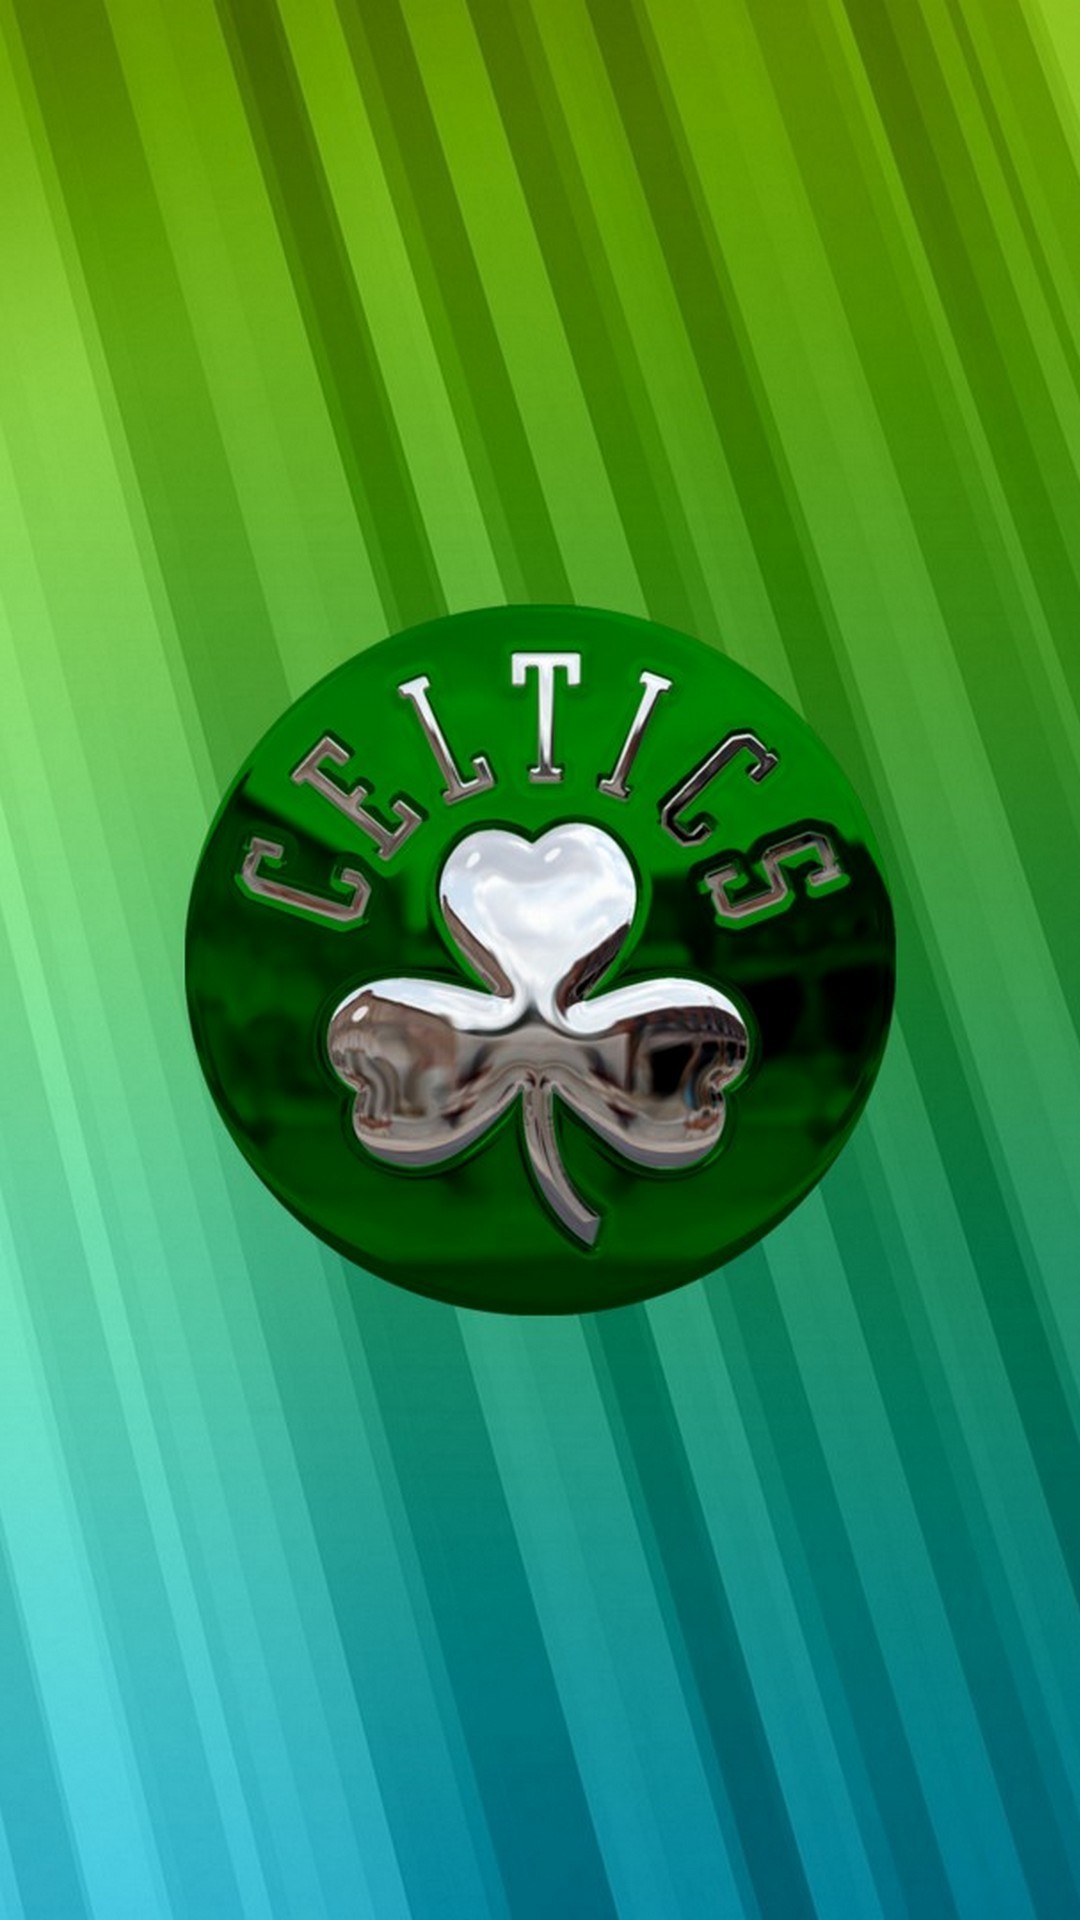 1080x1920 iPhone Wallpaper Boston Celtics Logo with image resolution  pixel.  You can make this wallpaper